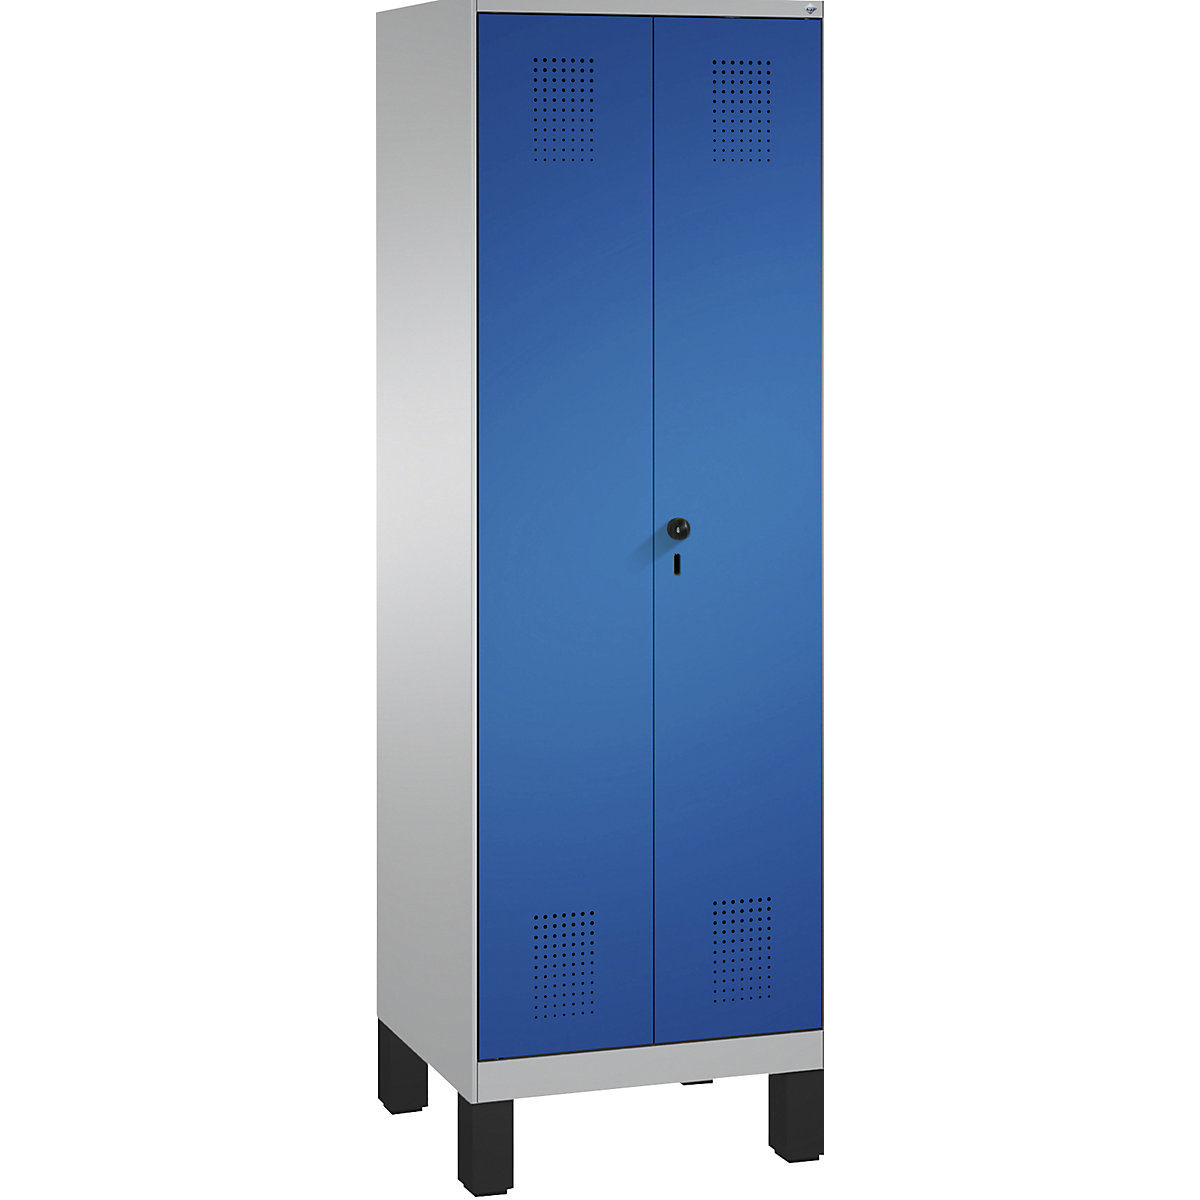 EVOLO laundry cupboard / cloakroom locker – C+P, 4 shelves, clothes rail, compartments 2 x 300 mm, with feet, white aluminium / gentian blue-4